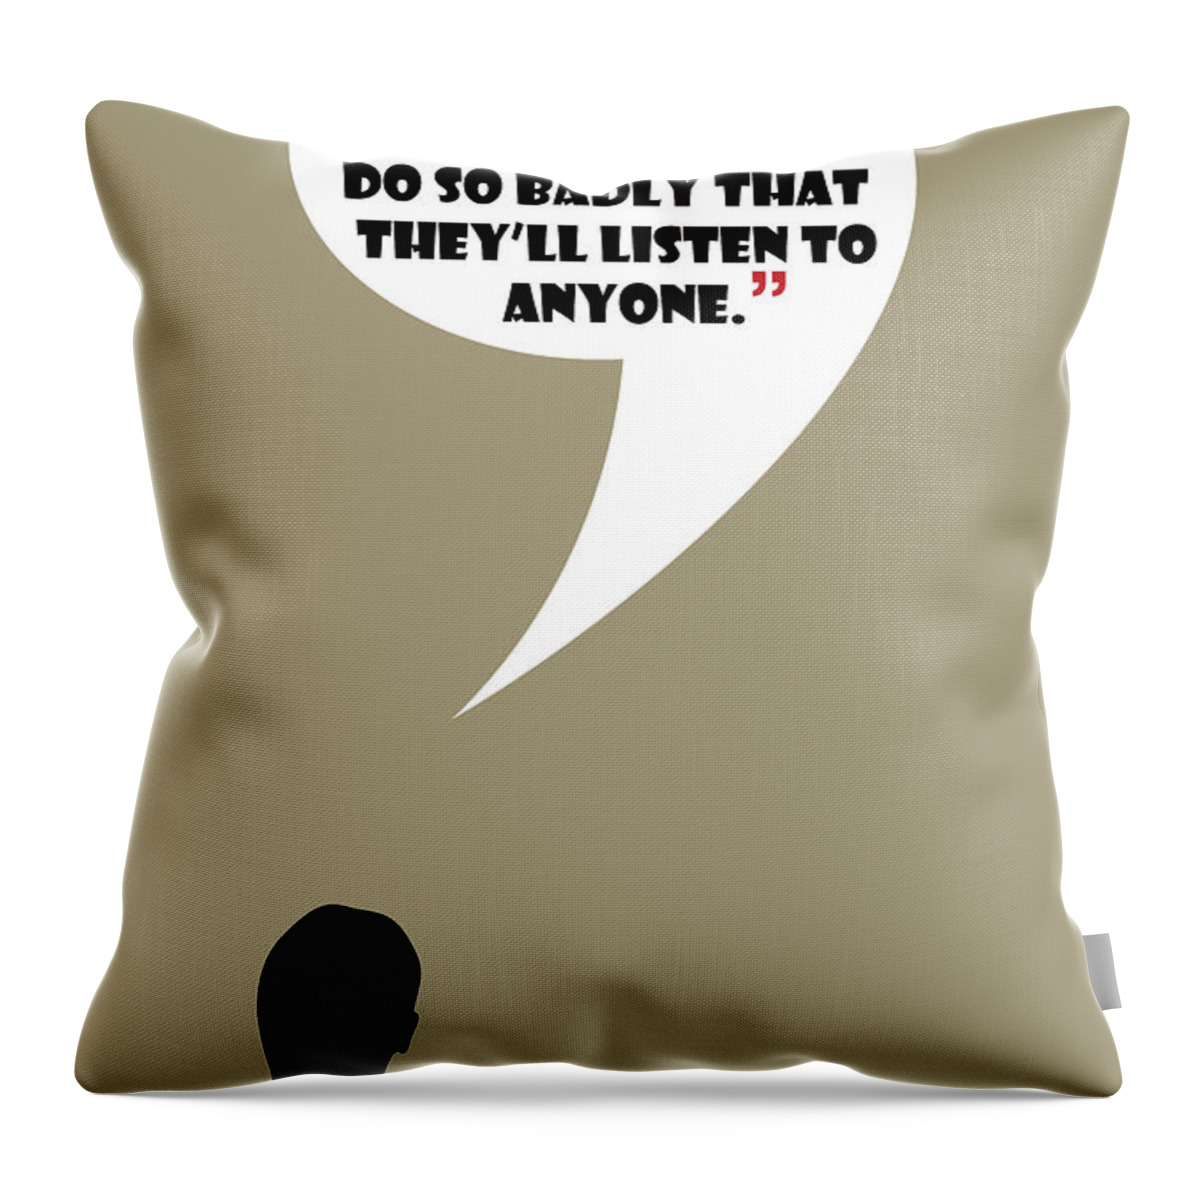 Don Draper Throw Pillow featuring the painting Listen To Anyone - Mad Men Poster Don Draper Quote by Beautify My Walls